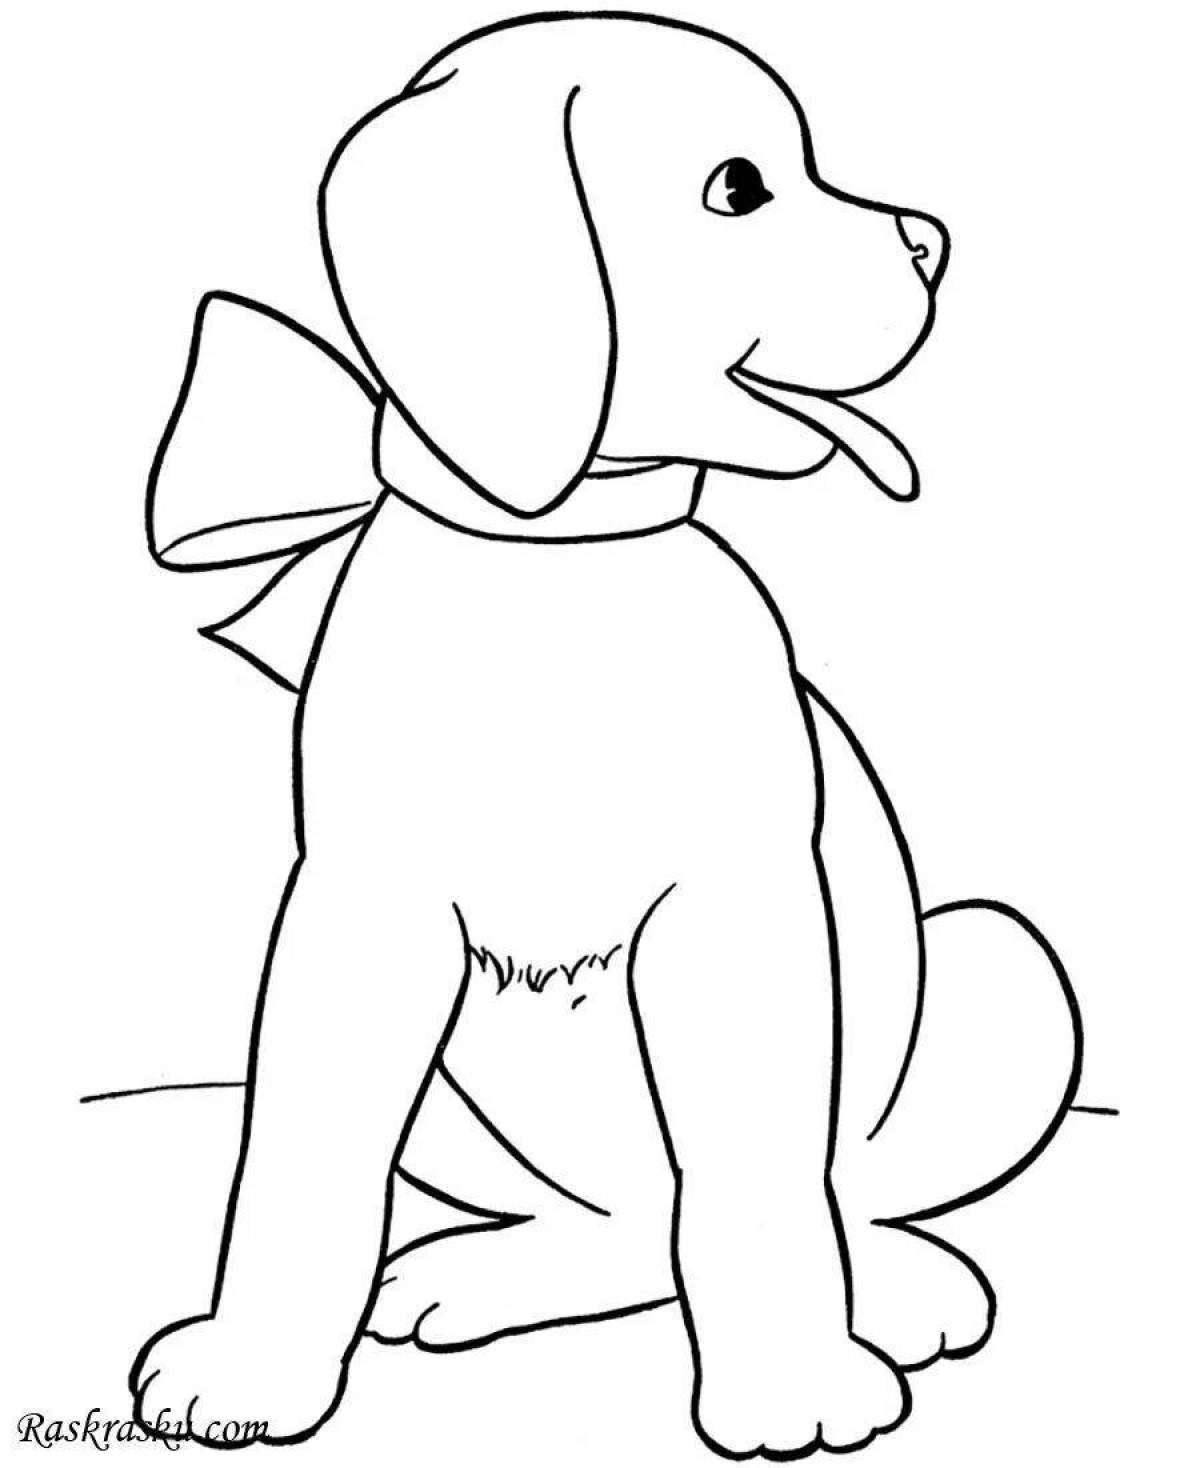 Smiling dog coloring book